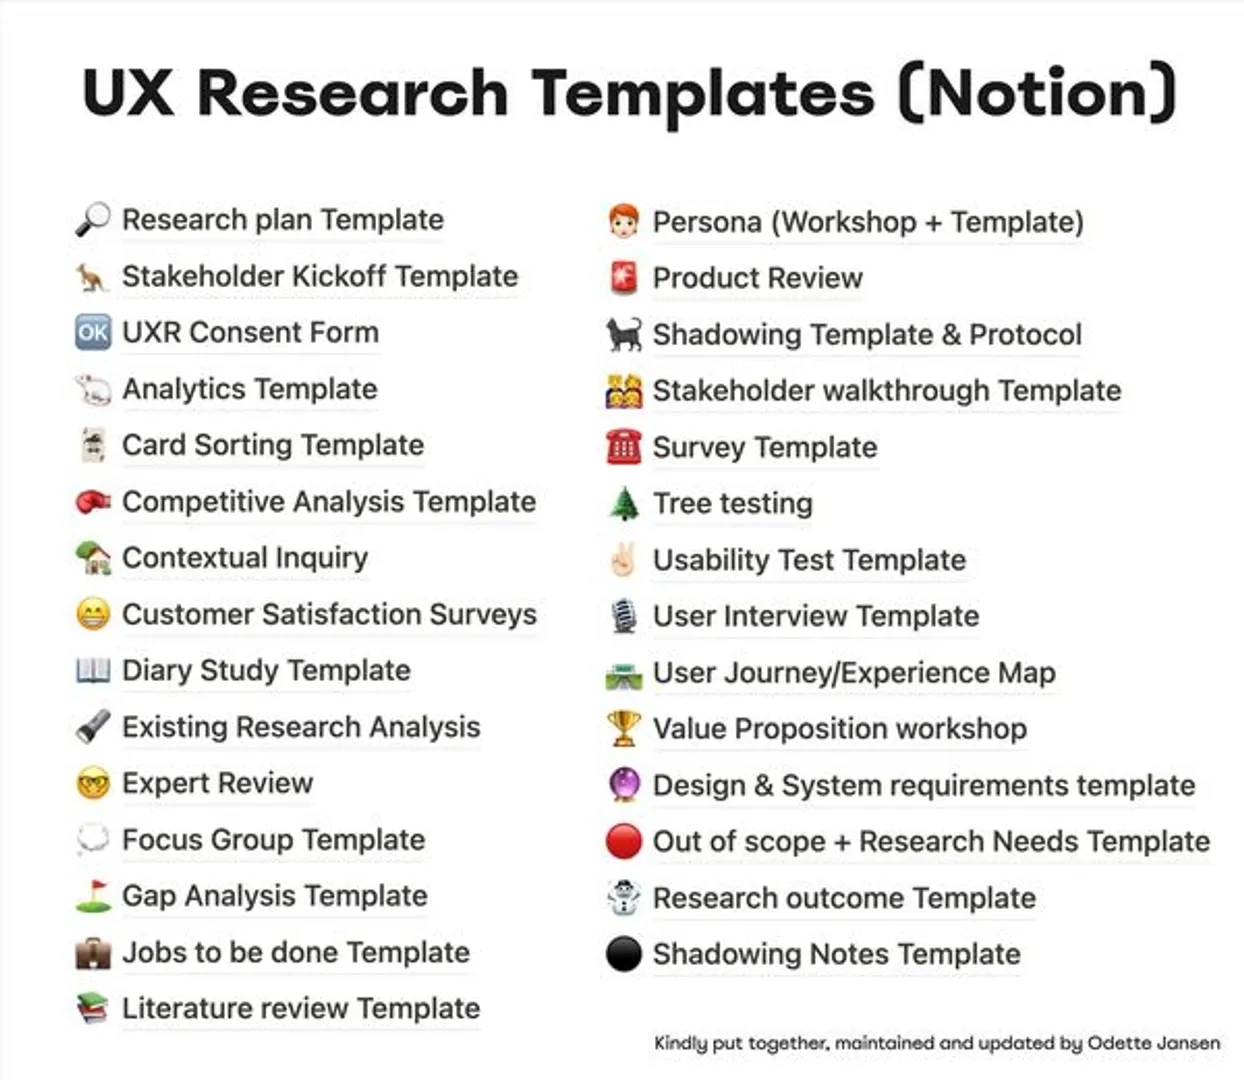 🔎 UX Research Templates (Notion, updated) (https://notion.so/UX-Research-Templates...), a helpful Notion hub with UX research templates for card sorting, gap analysis, jobs to be done, shadowing, stakeholder walkthrough, tree testing and usability testing. By Odette Jansen.